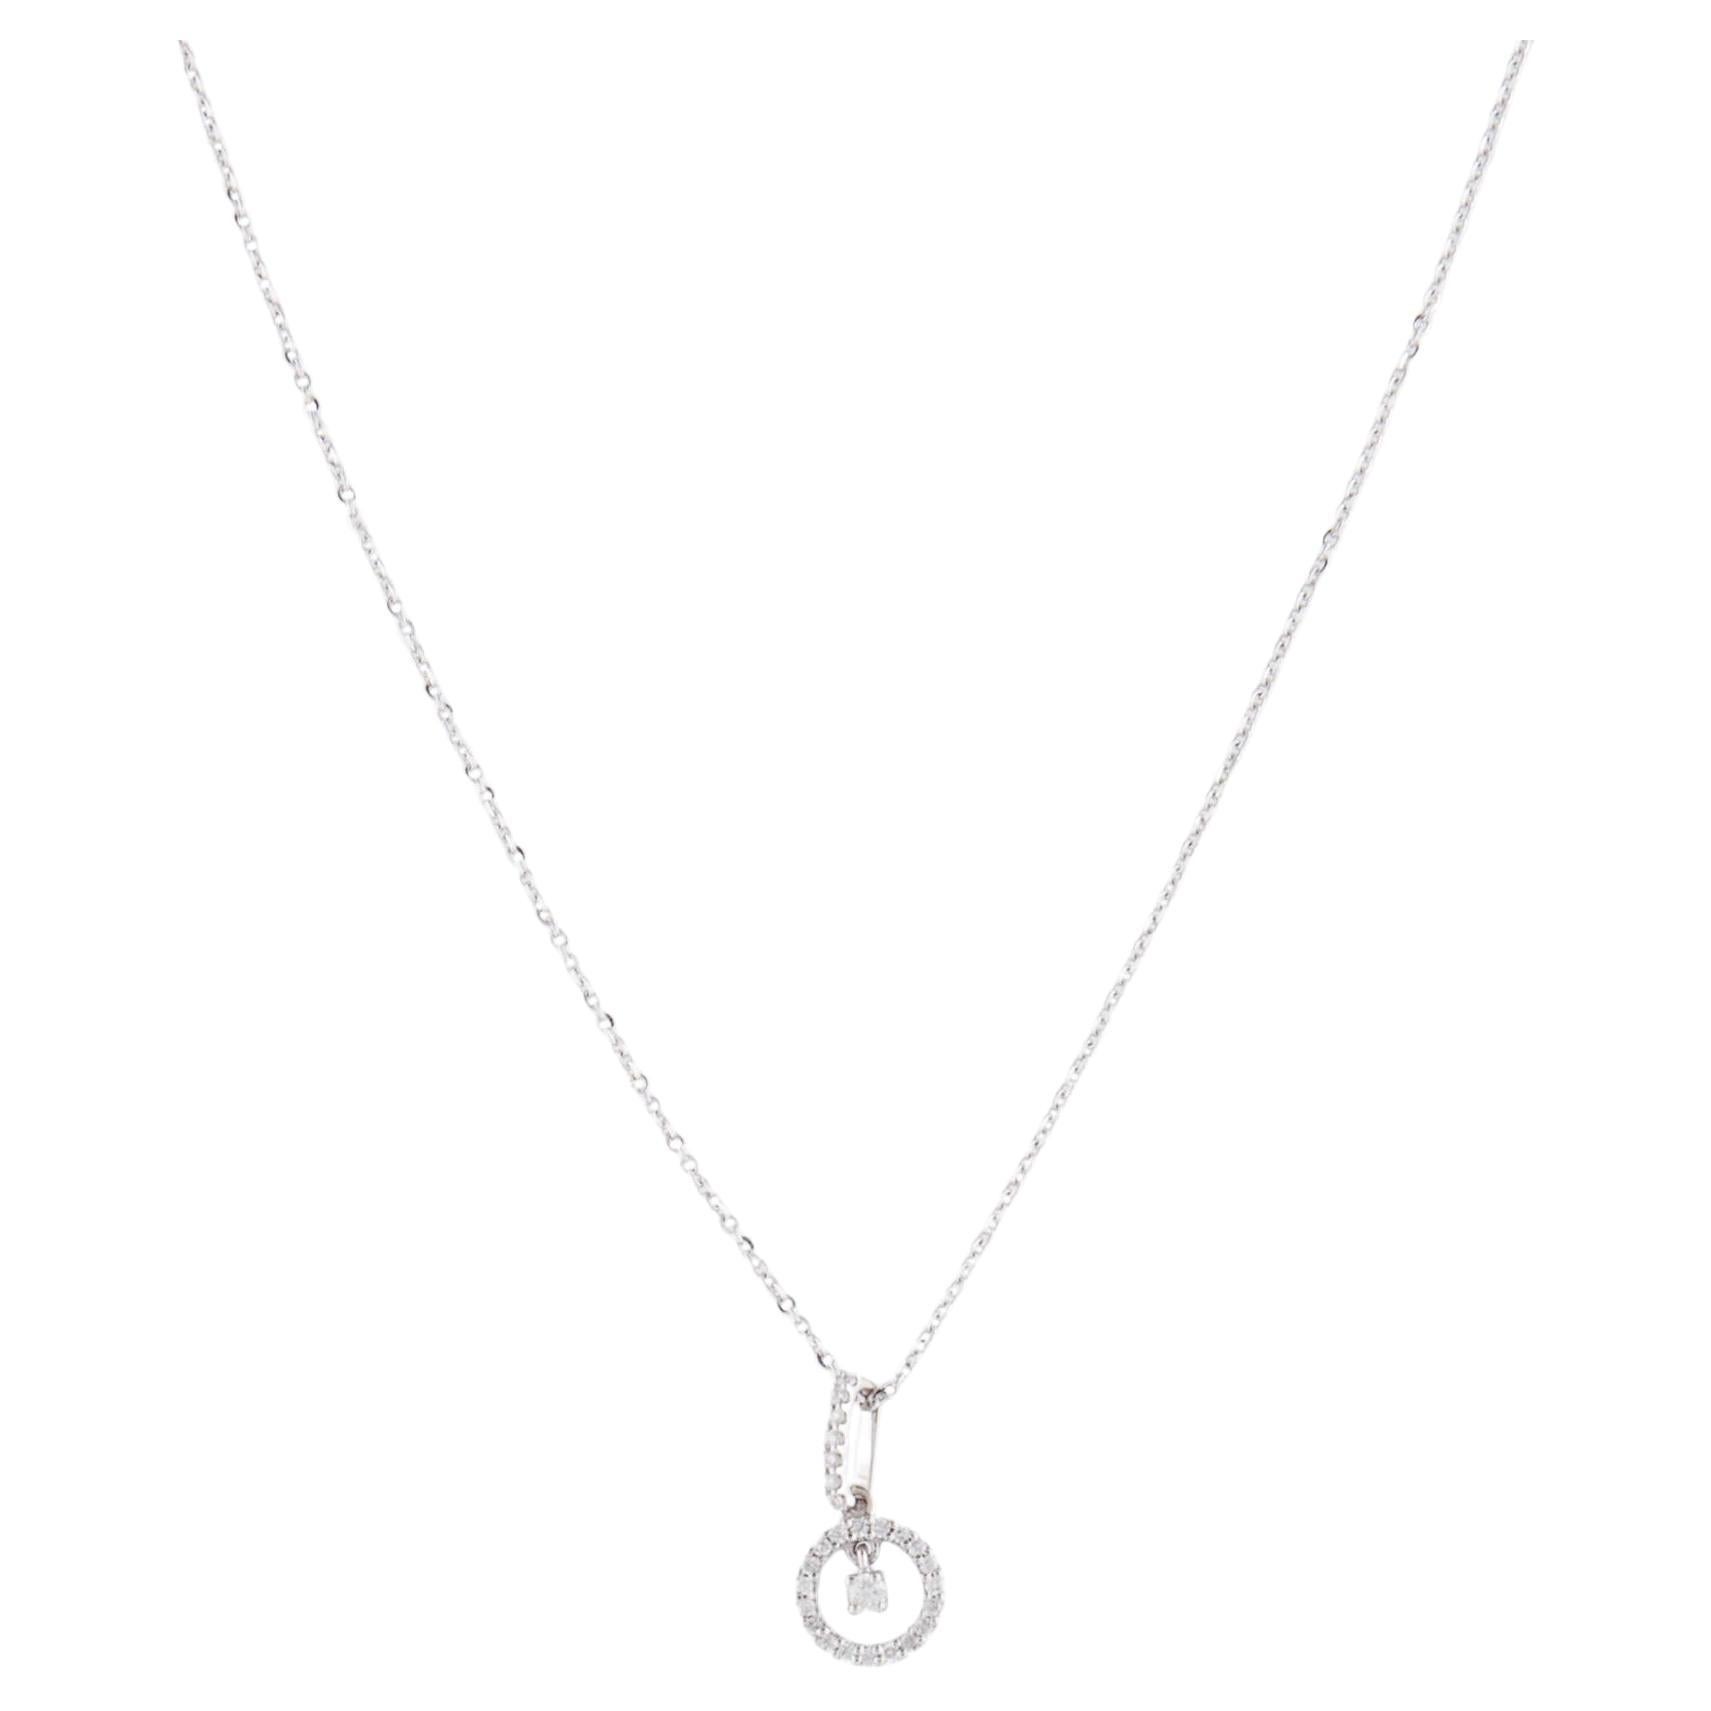 Luxury 14K Diamond Pendant Necklace - Exquisite Statement Piece in White Gold For Sale